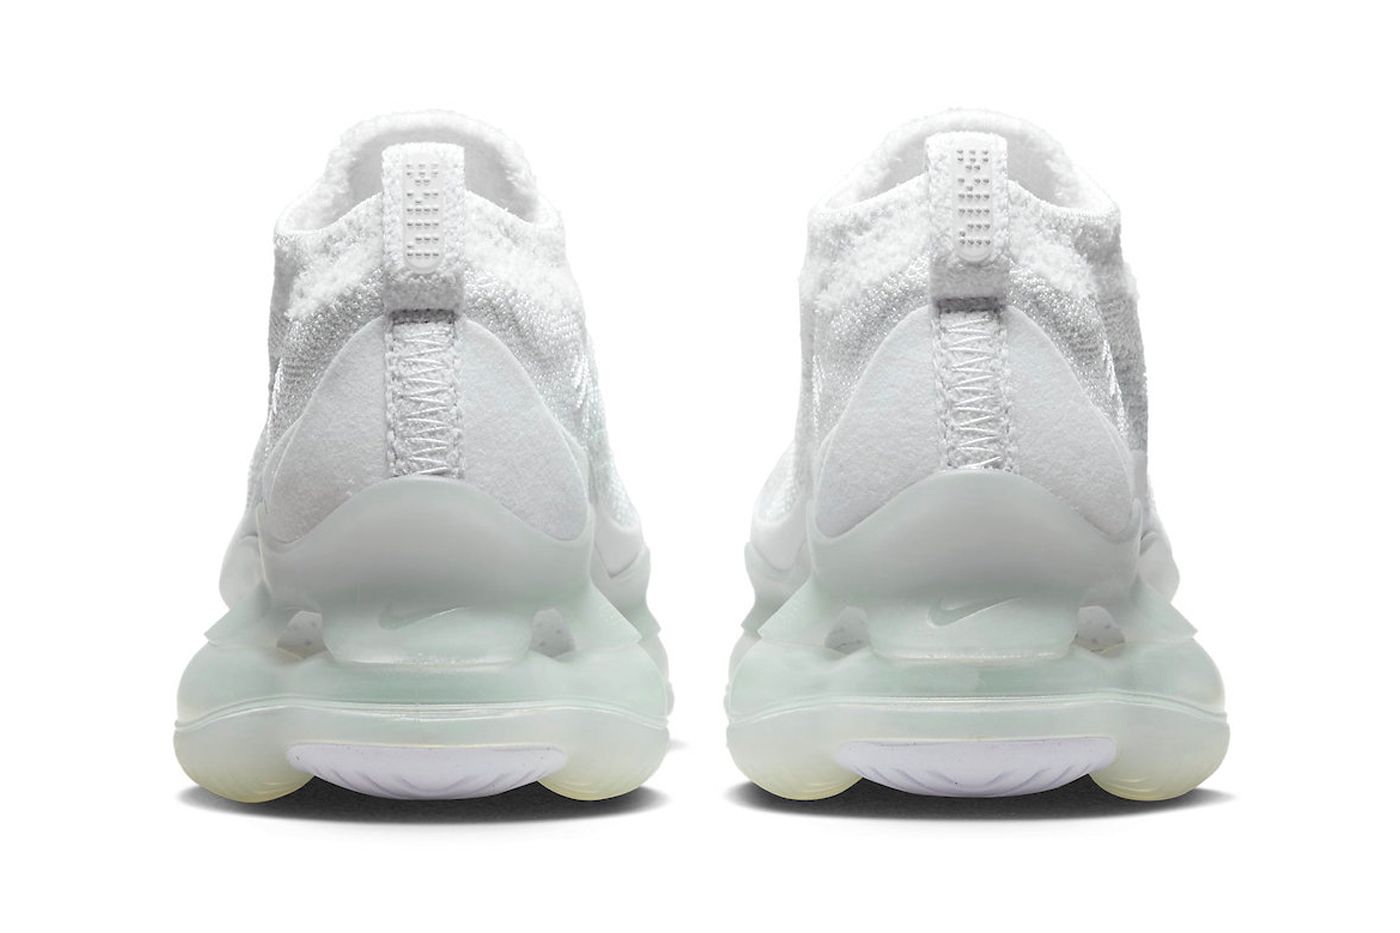 Nike Air Max Scorpion Surfaces in "White Mint"